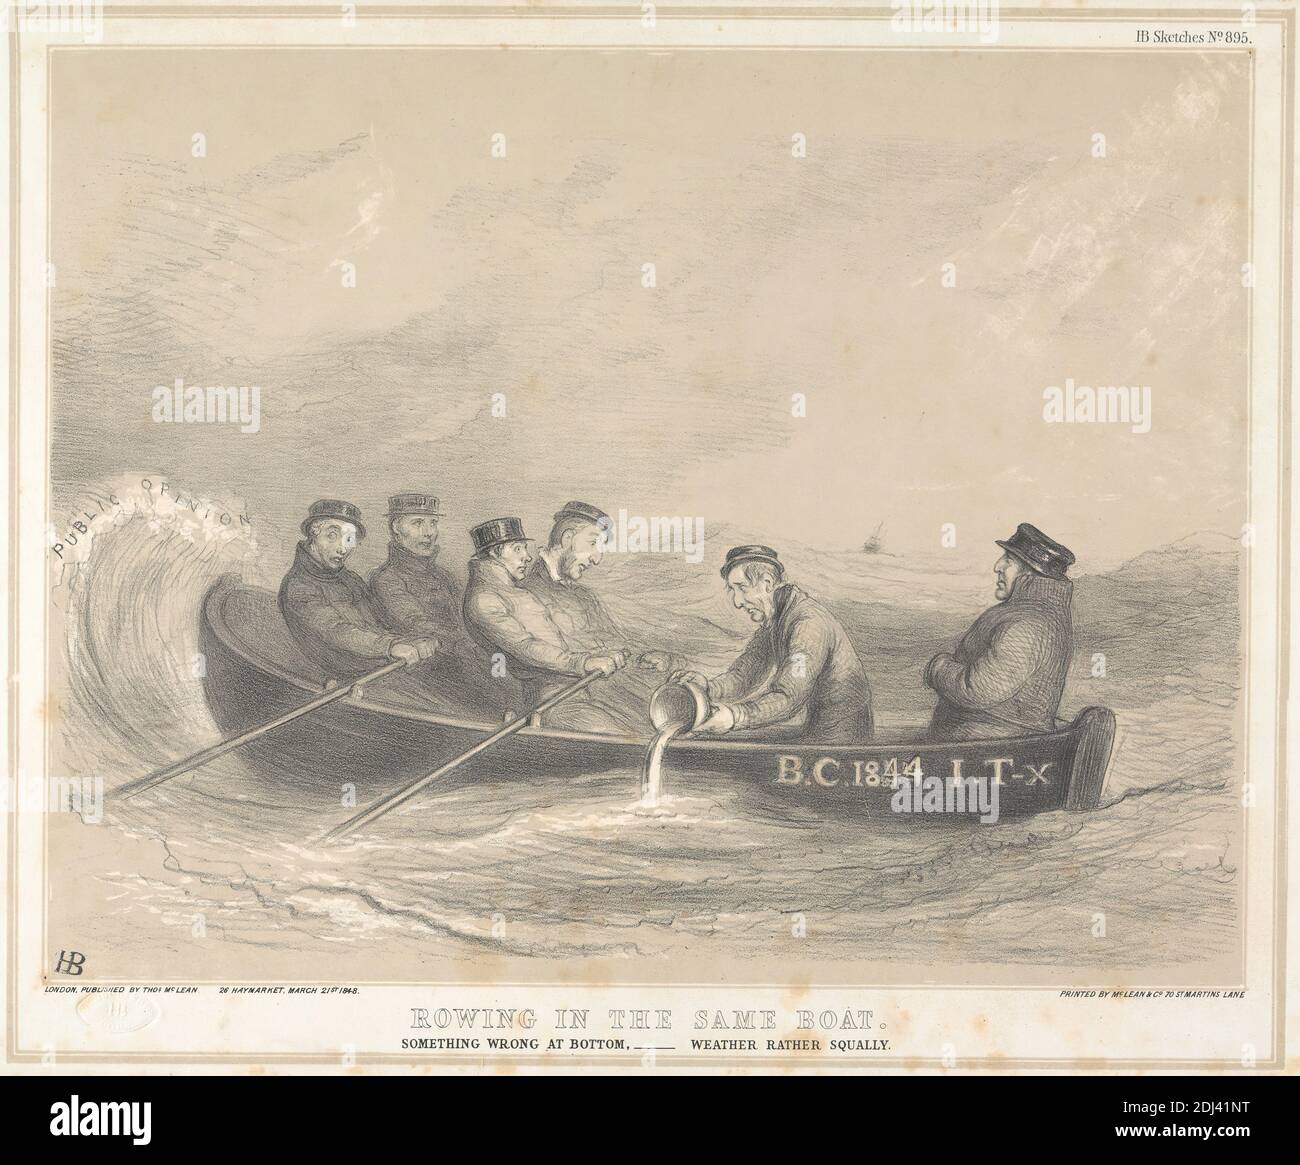 Rowing in the Same Boat: Something Wrong at the Bottom... Weather Rather Squally, Print made by John Doyle ('H.B.'), 1797–1868, Irish, Printed by Thomas McLean, 1788–1875, British, Published by Thomas McLean, 1788–1875, British, 1848, Lithograph in tan and black ink on moderately thick, smooth, beige wove paper, Sheet: 11 15/16 x 18 1/16 inches (30.4 x 45.8 cm) and Image: 10 1/4 x 13 1/8 inches (26 x 33.3 cm), boat, bucket, genre subject, hats, leaking, marine art, men, meteorology, ocean, political, politicians, politics, public opinion, riding, rowboat, rowing, sailing, satire, satirical Stock Photo